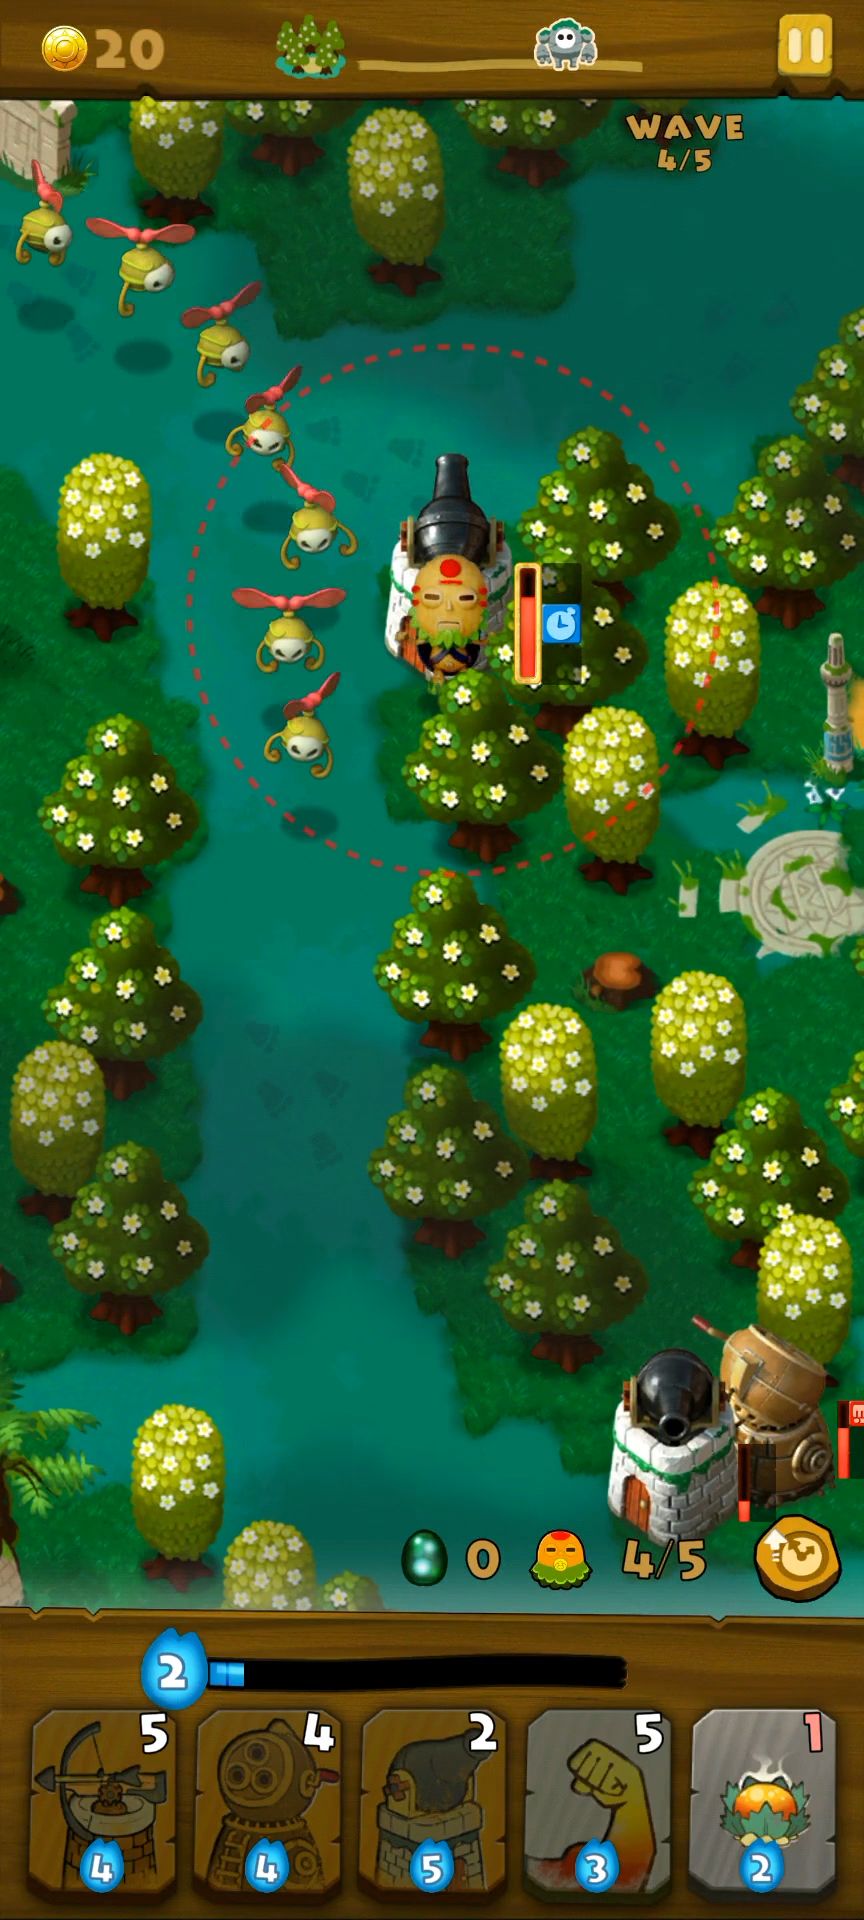 Gameplay of the PixelJunk Monsters for Android phone or tablet.